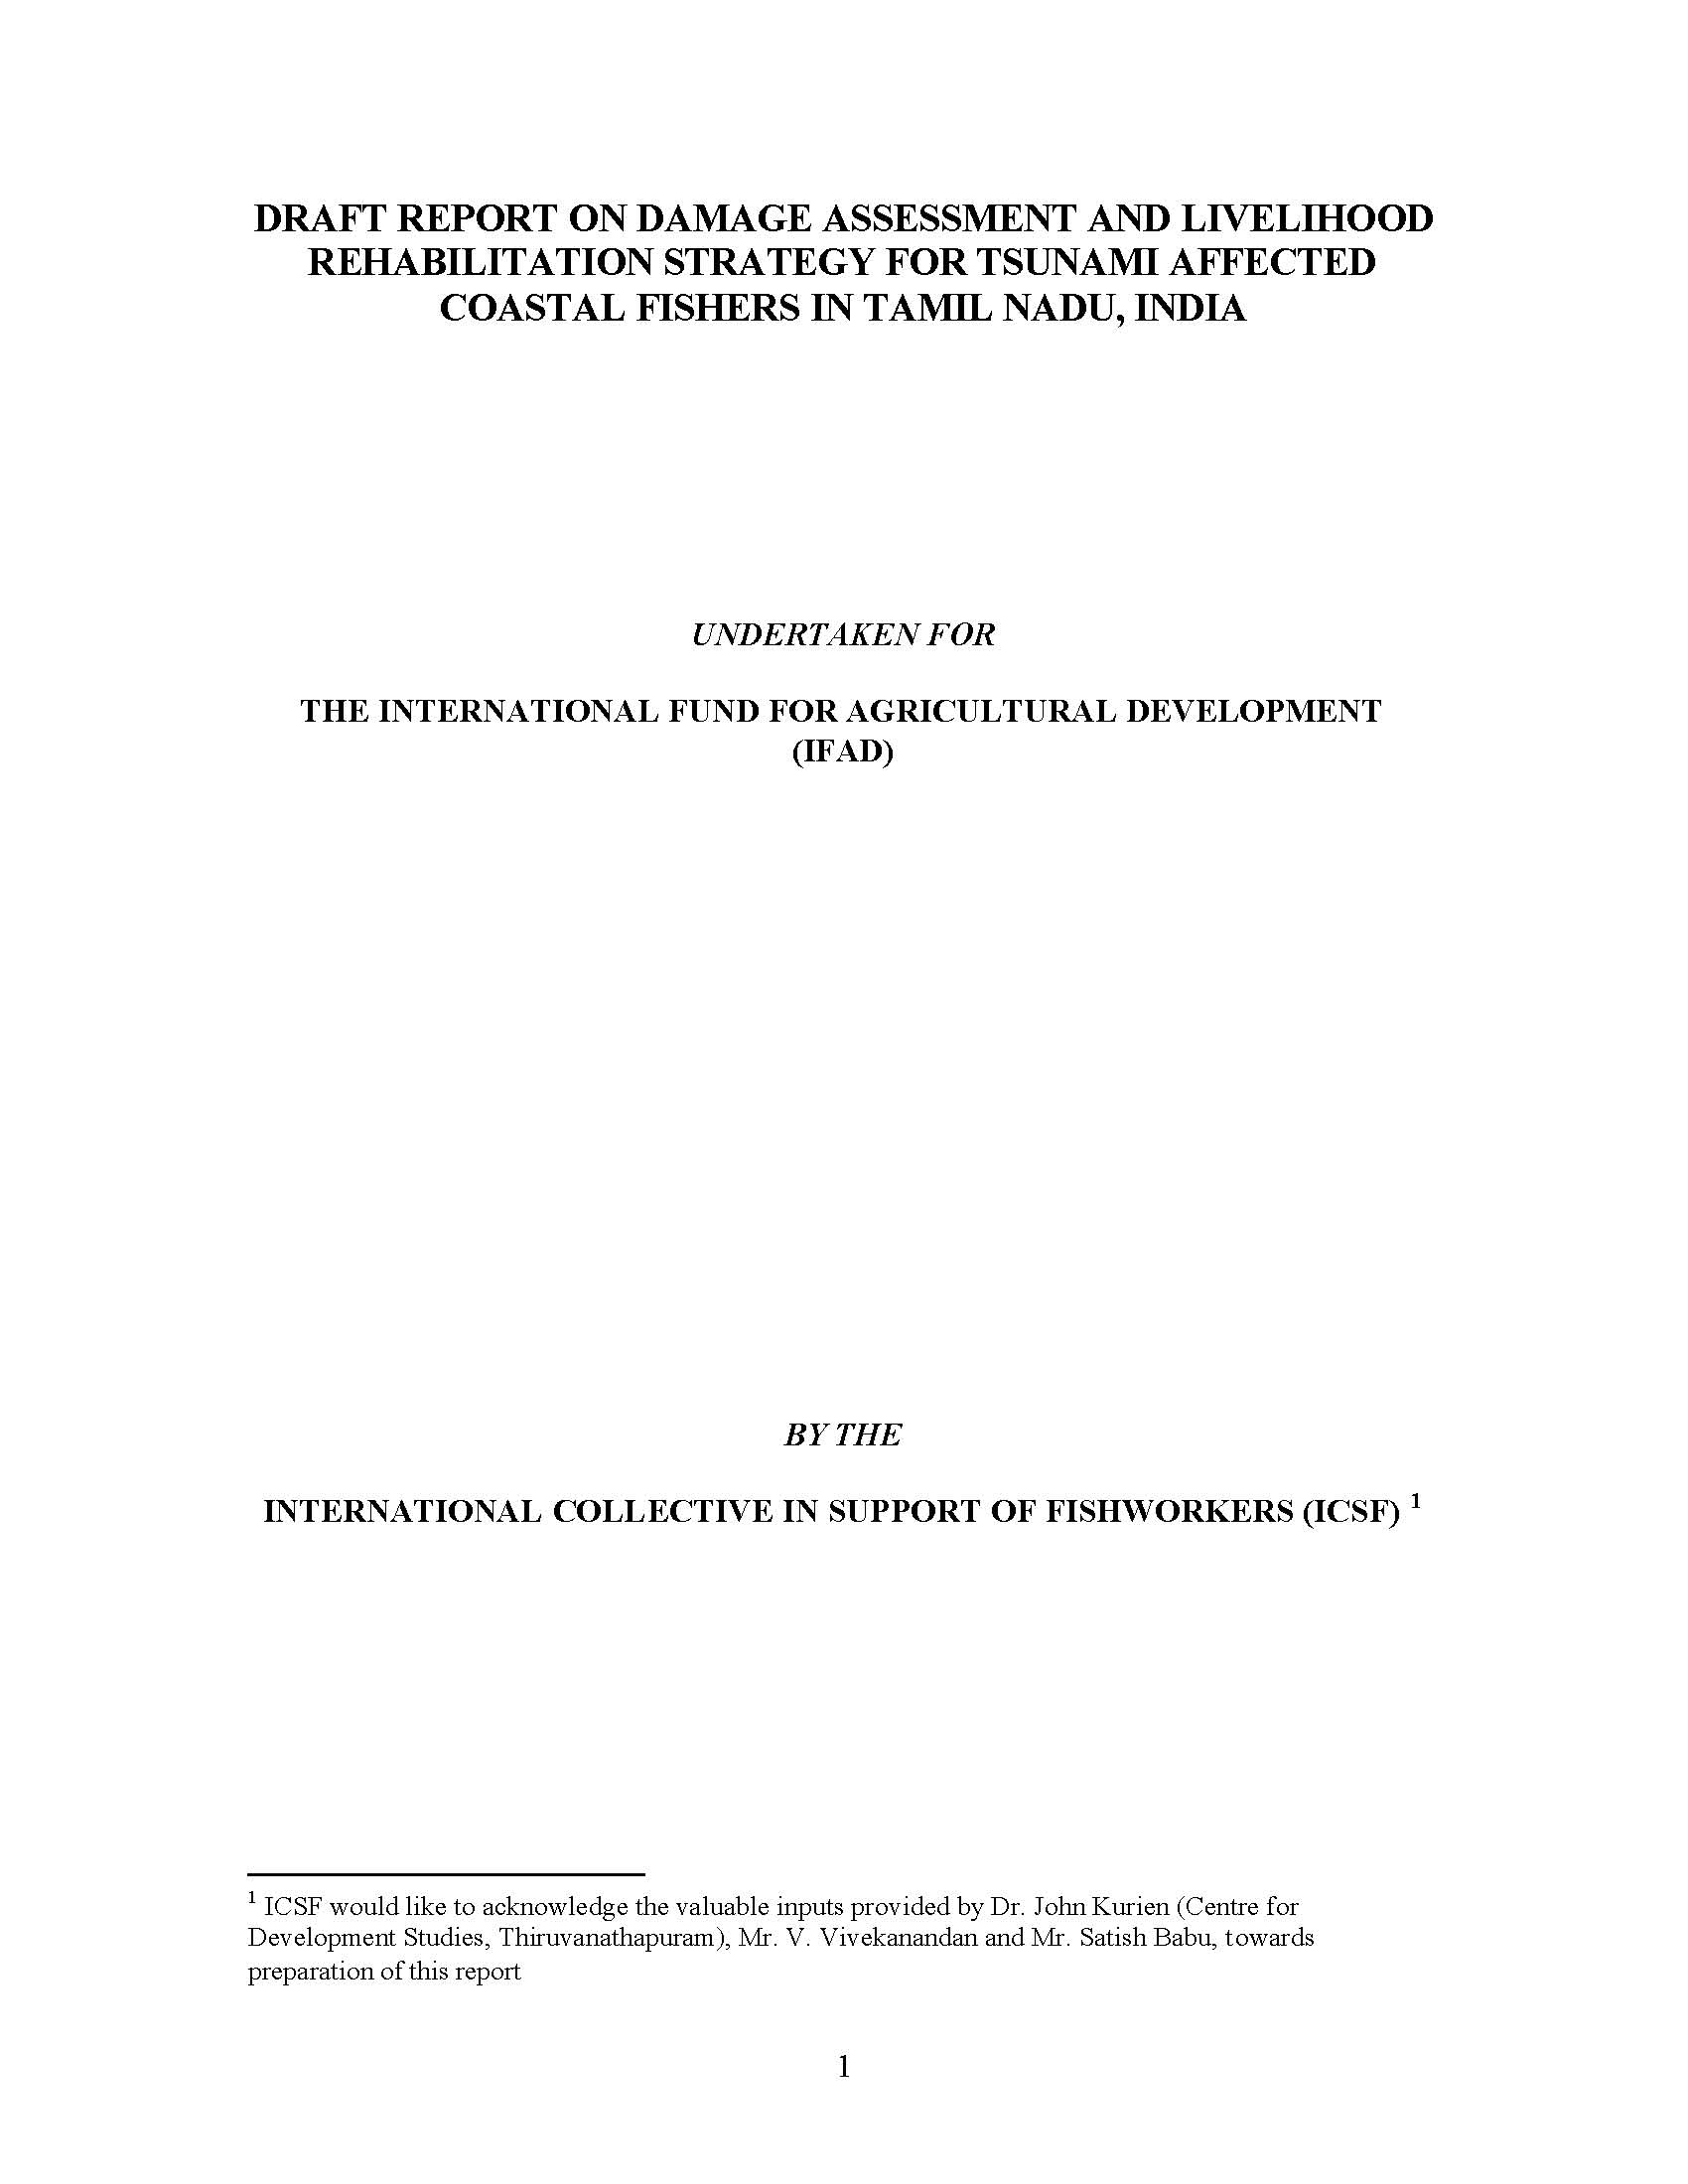 Draft report on damage assessment and livelihood rehabilitation strategy for tsunami affected coastal fishers in Tamil Nadu, India undertaken for the international fund for agricultural development (IFAD)